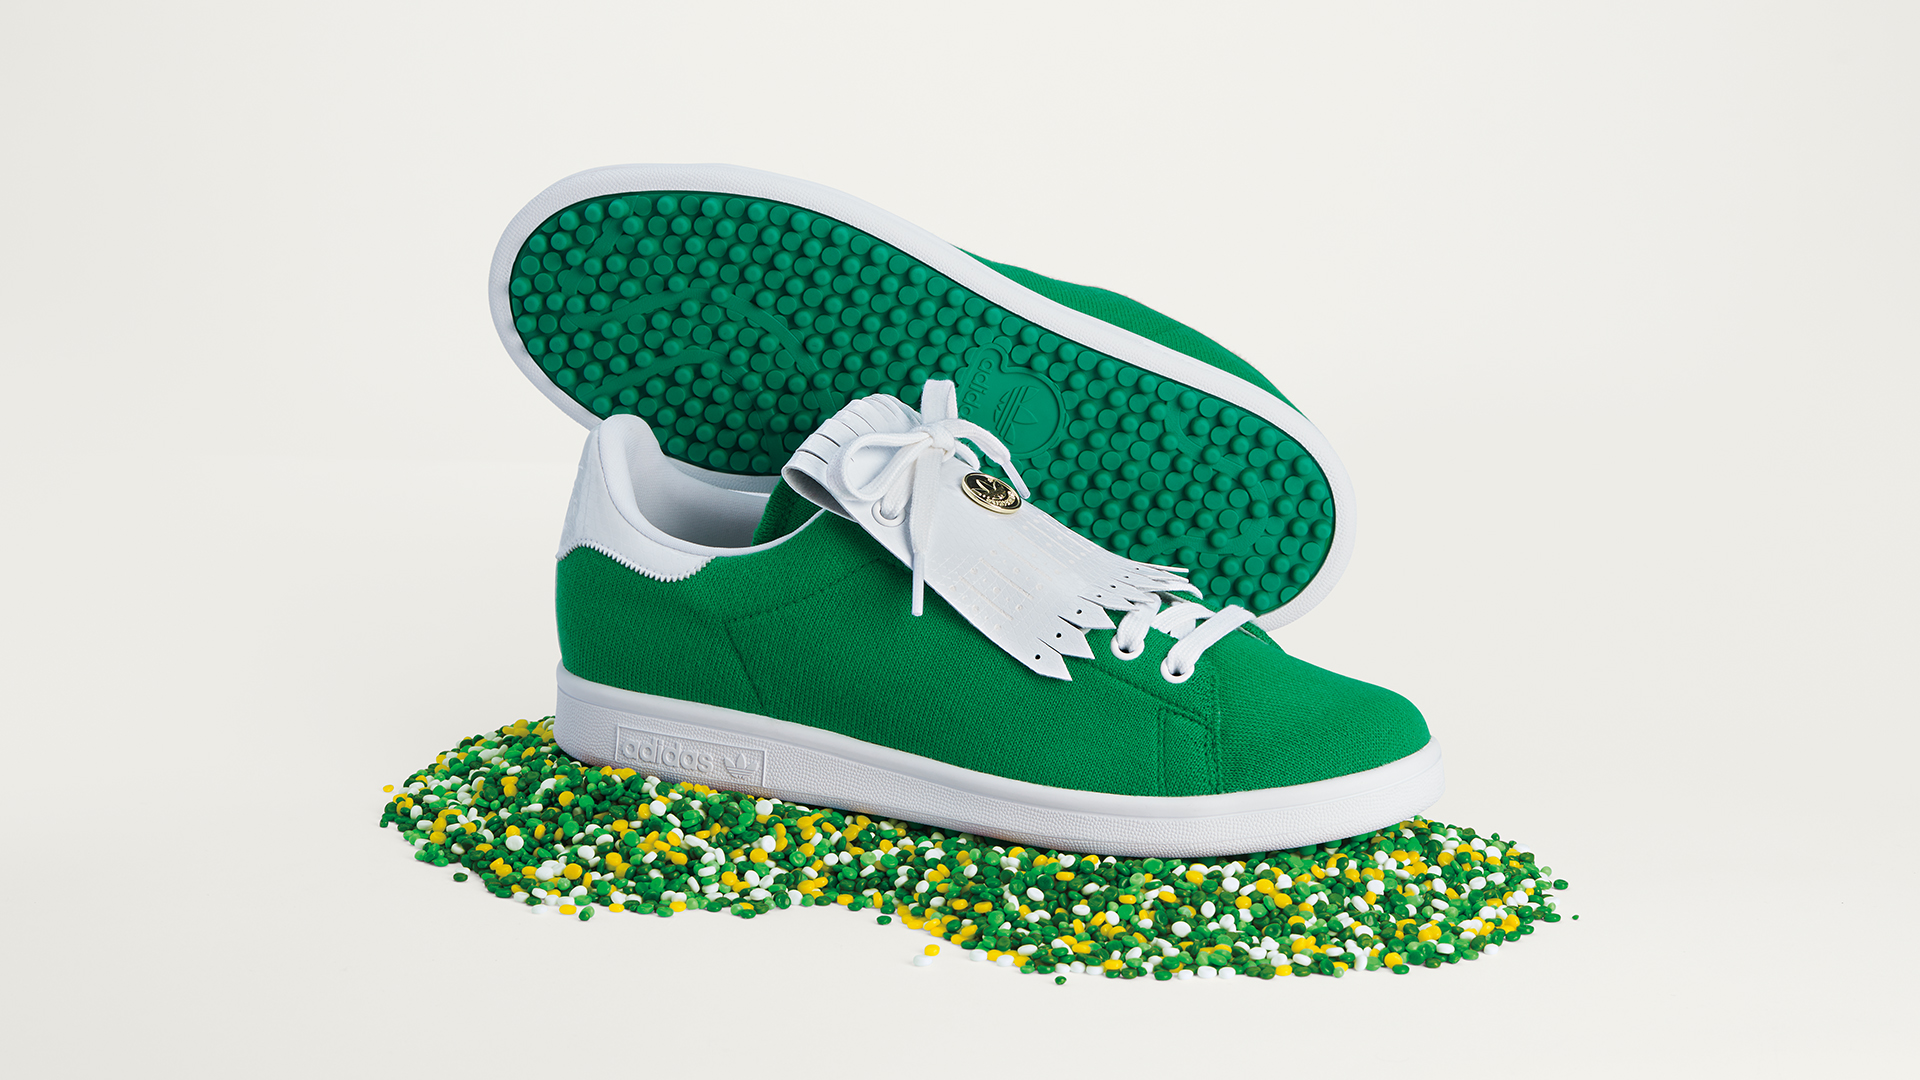 Stan Smith Primegreen Limited Spikeless Golf Shoes Dubai, SAVE 48% - aveclumiere.com